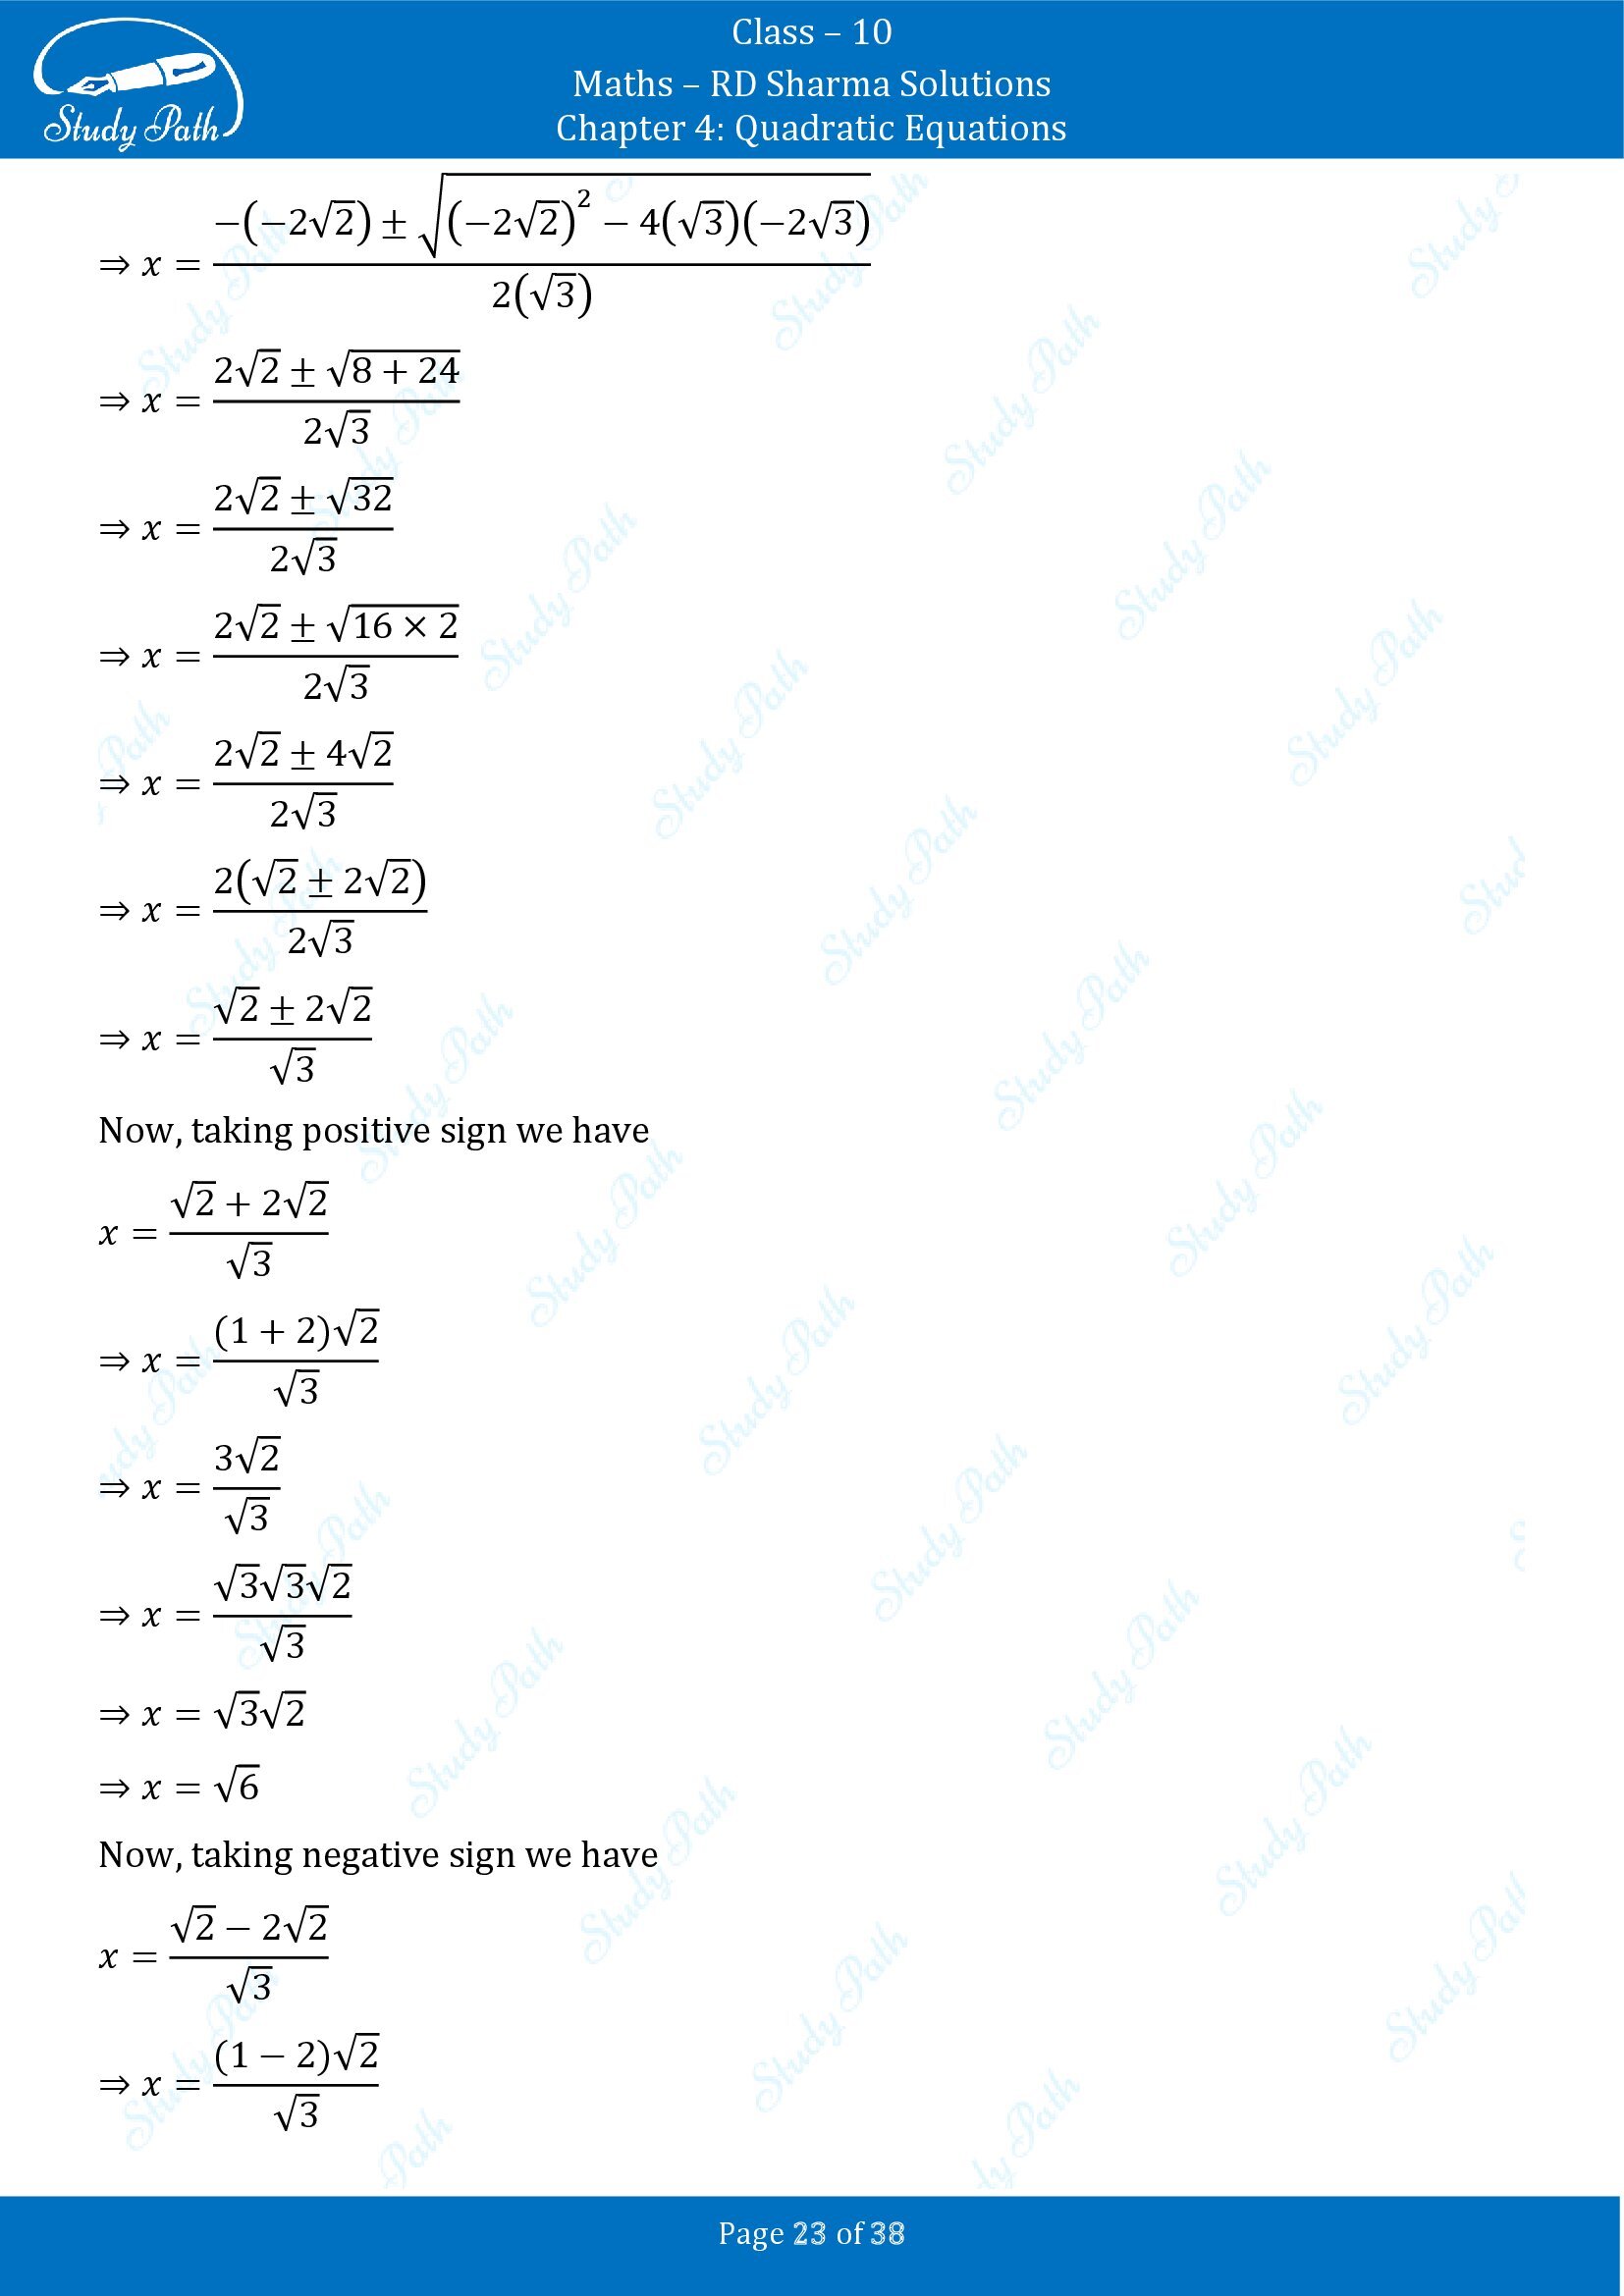 RD Sharma Solutions Class 10 Chapter 4 Quadratic Equations Exercise 4.3 00023